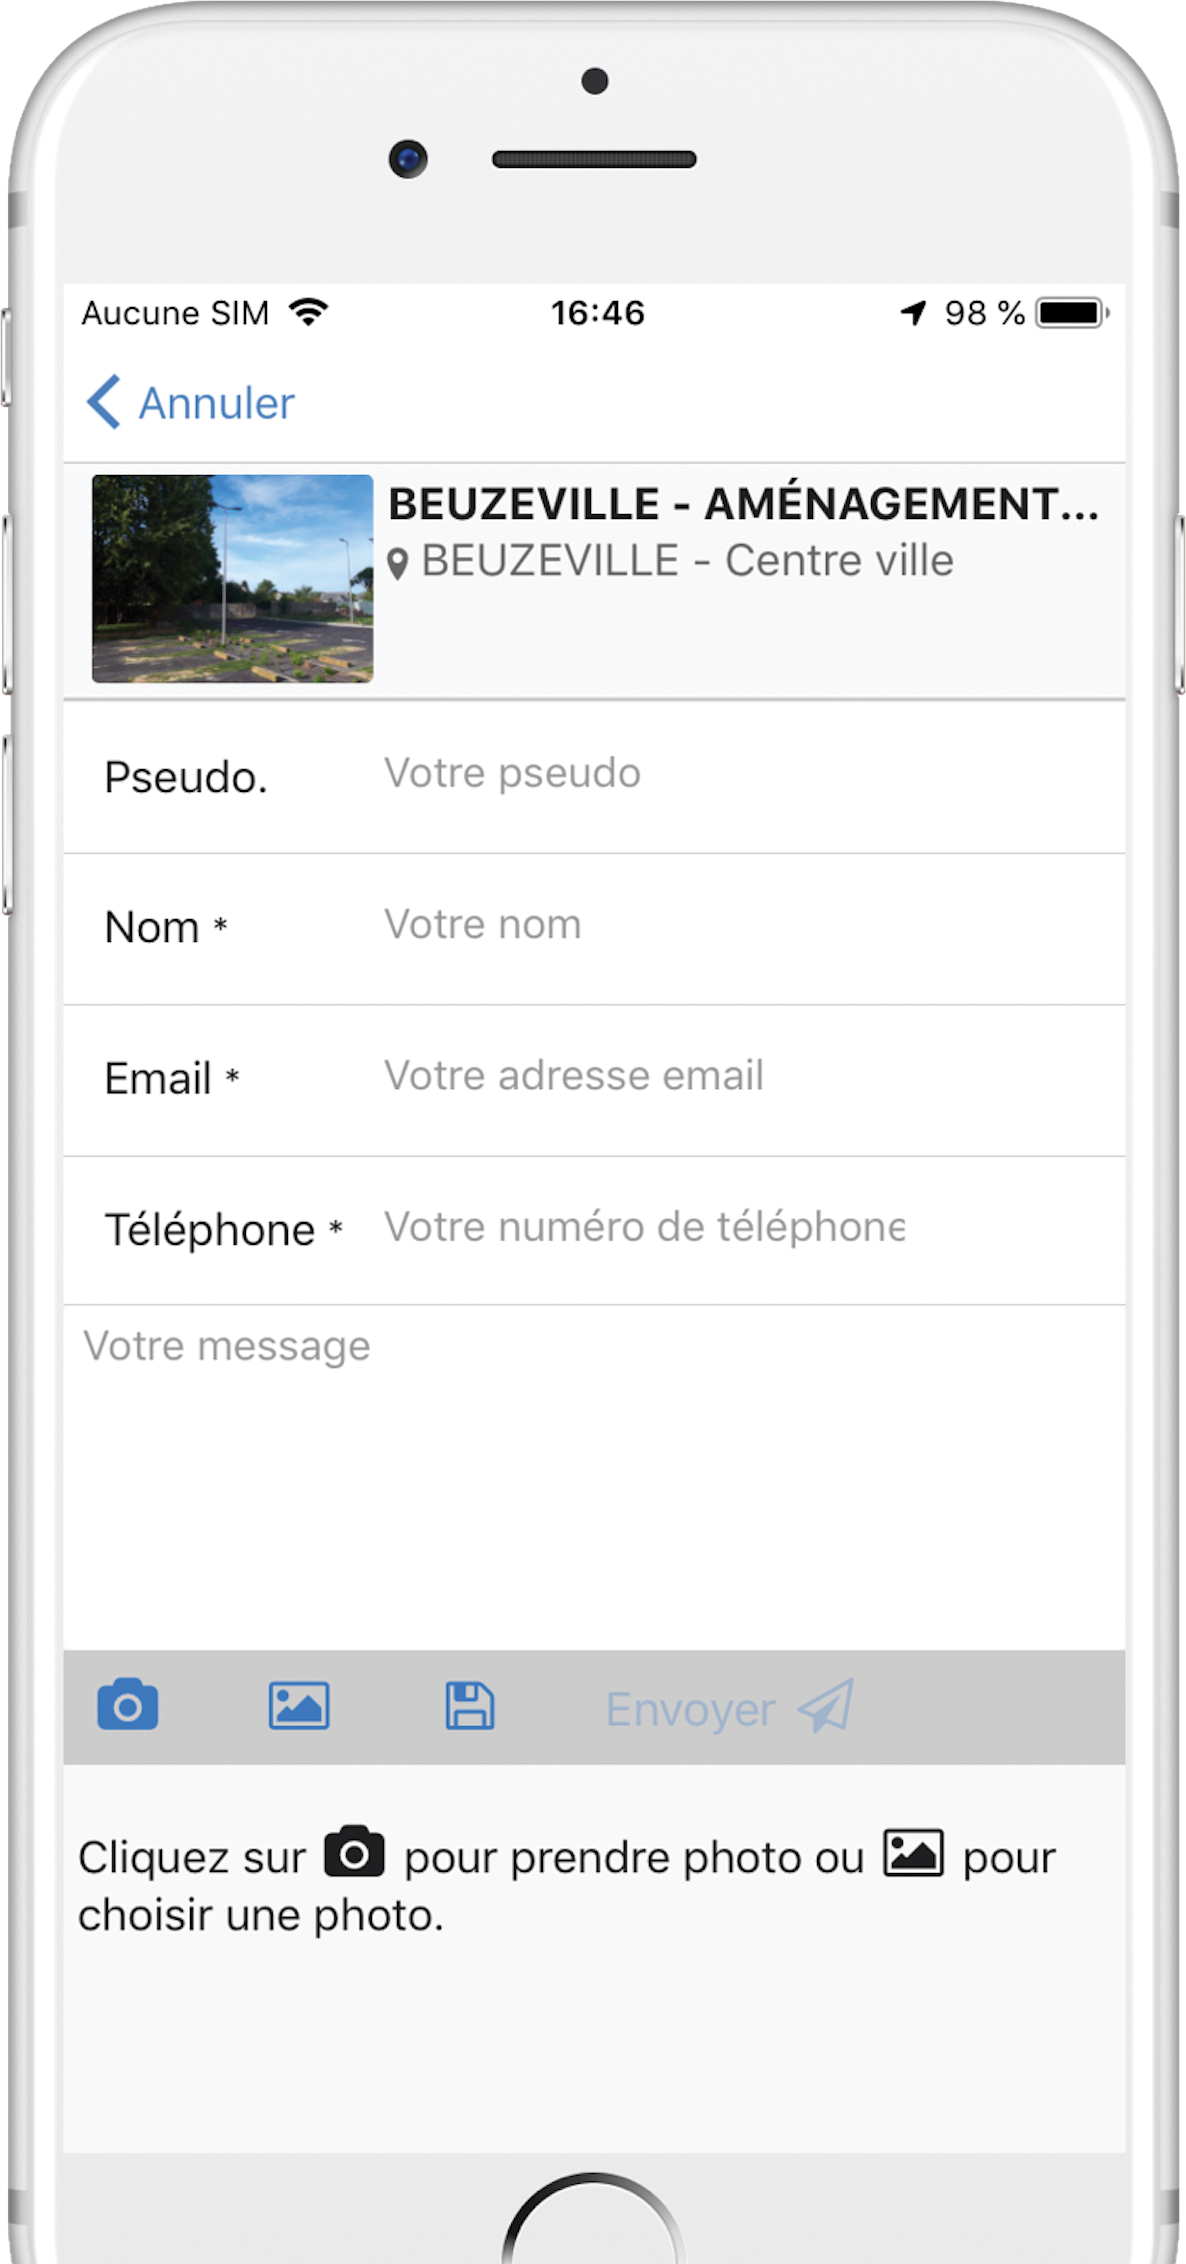 https://www.cquoictravaux.fr/storage/2019/09/iPhone2_footer.png